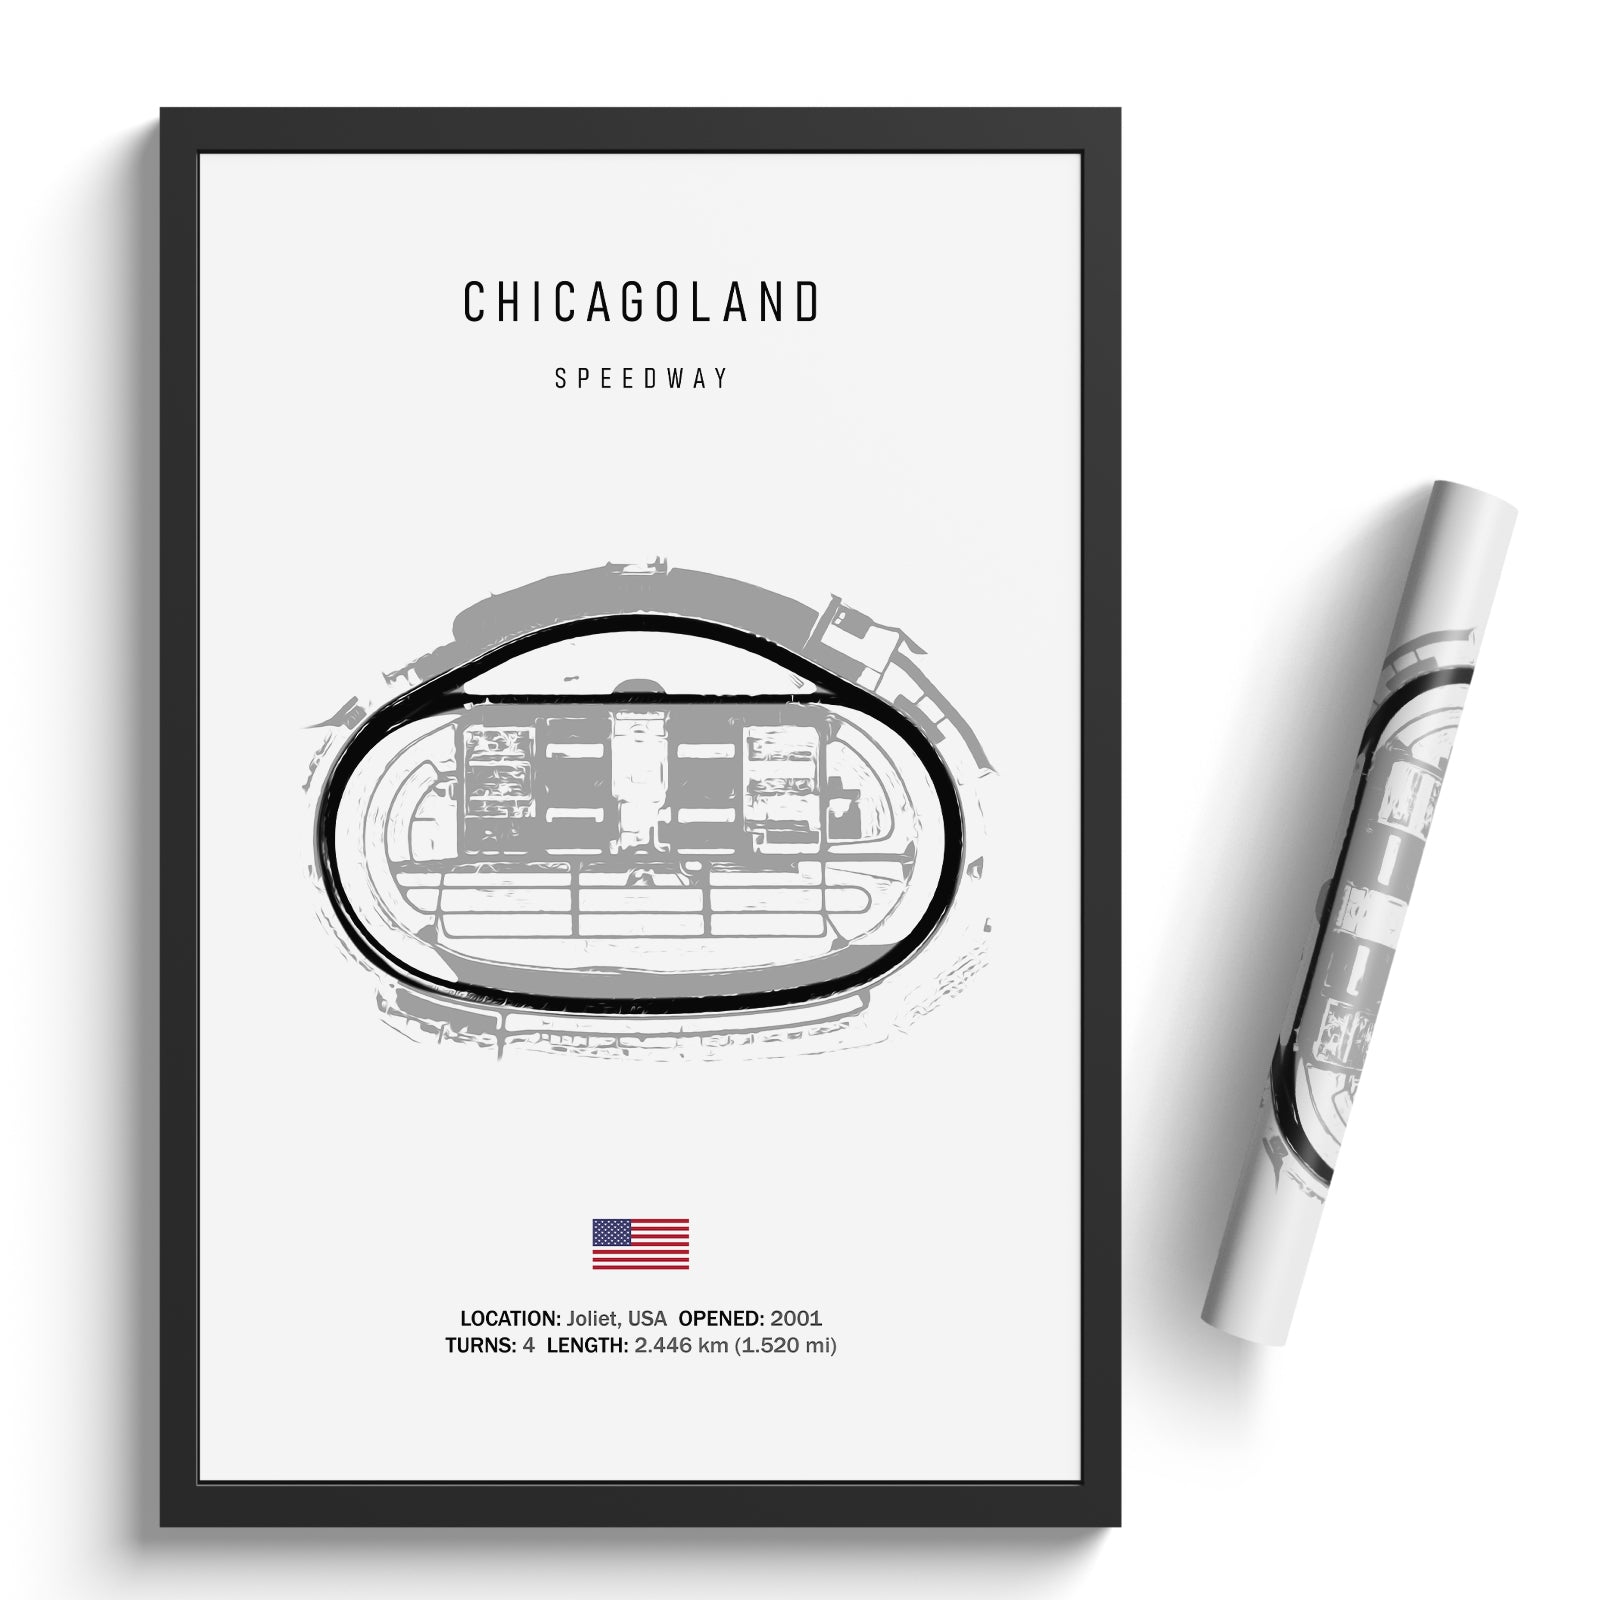 Chicagoland Speedway - Racetrack Print